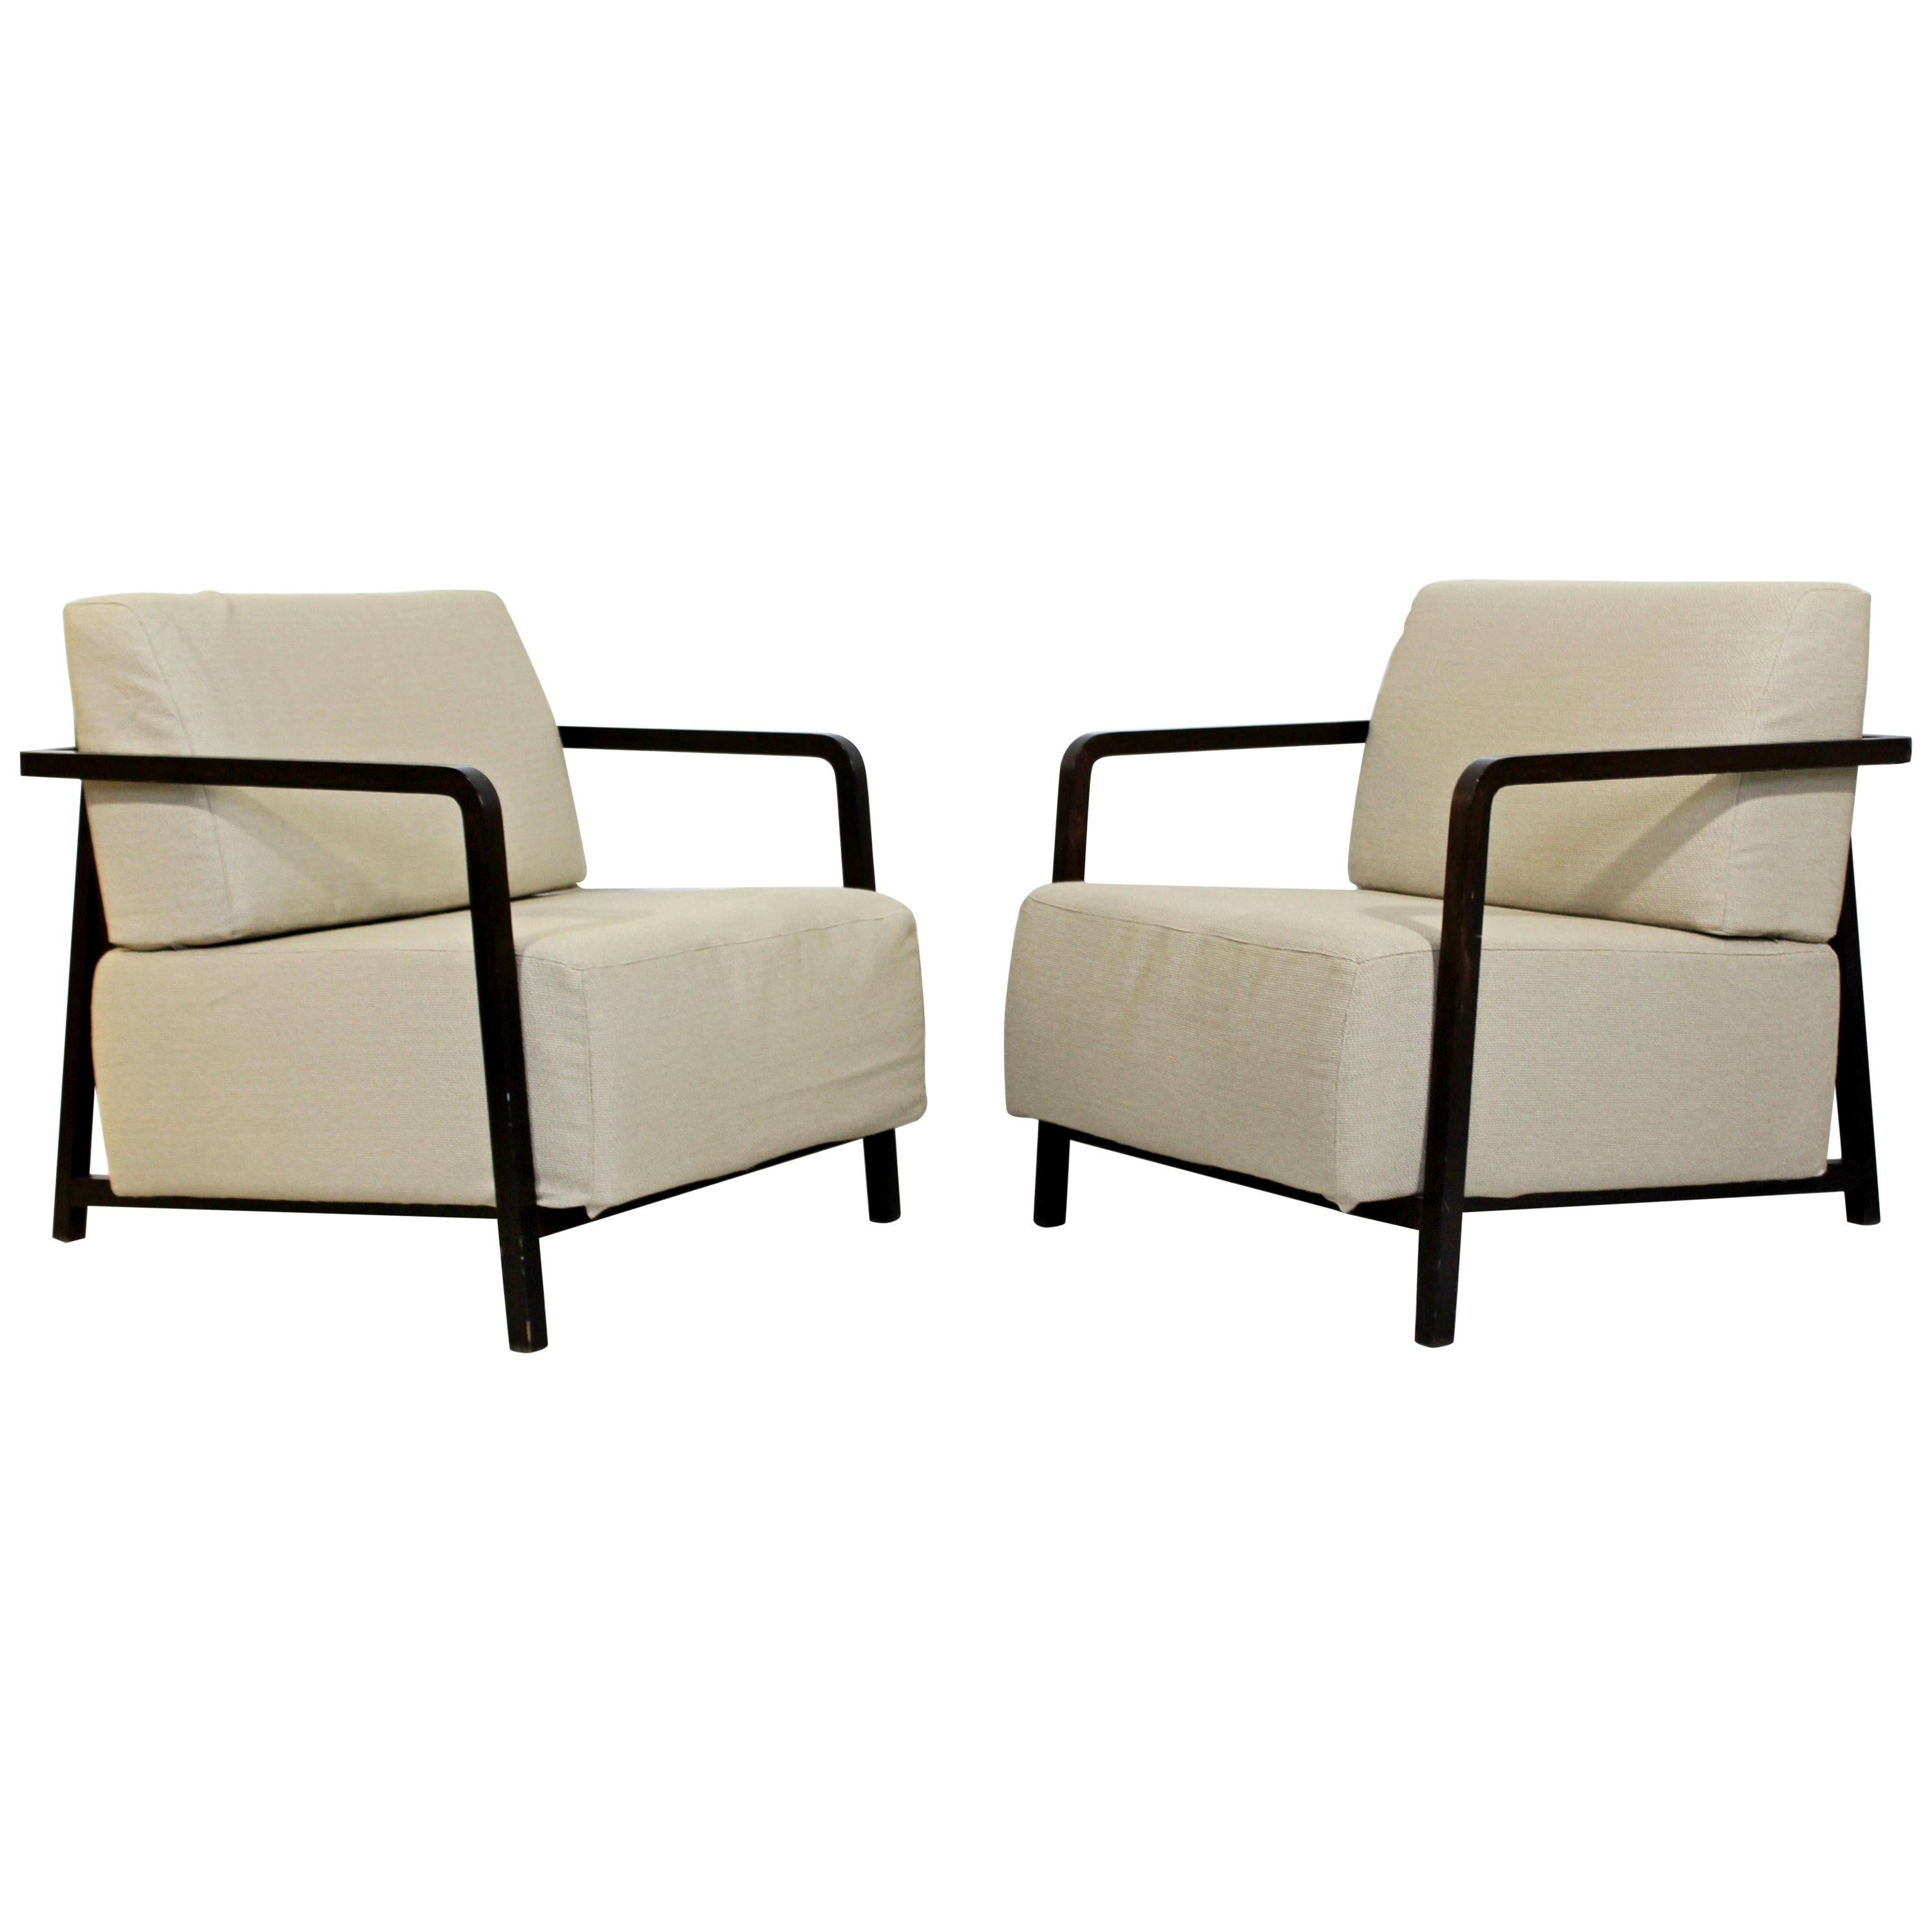 Contemporary Modern Pair of Lounge Armchairs by Calligaris Made in Italy